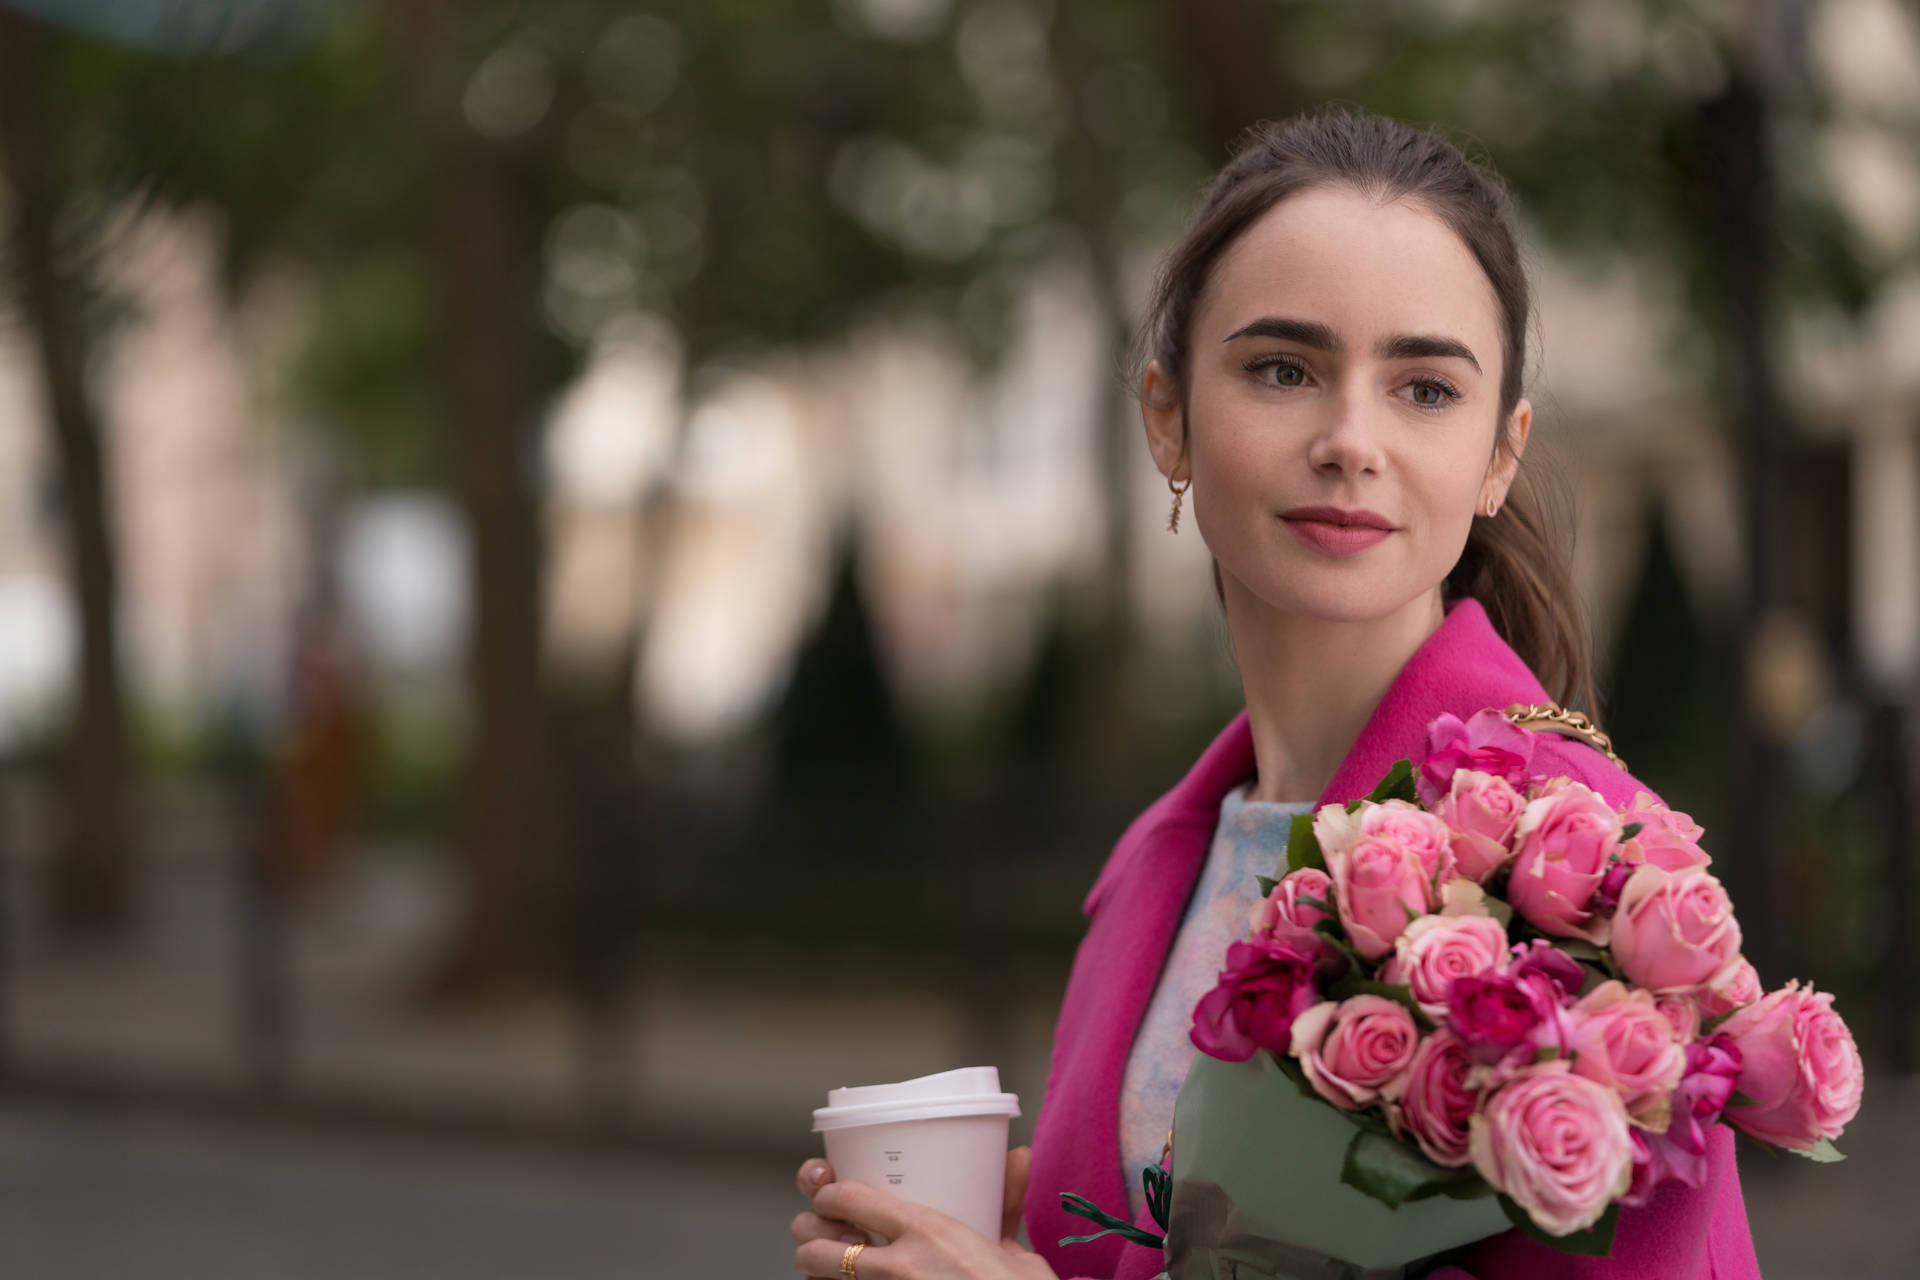 Emily Bloom In Paris, Strolling With Pink Roses.